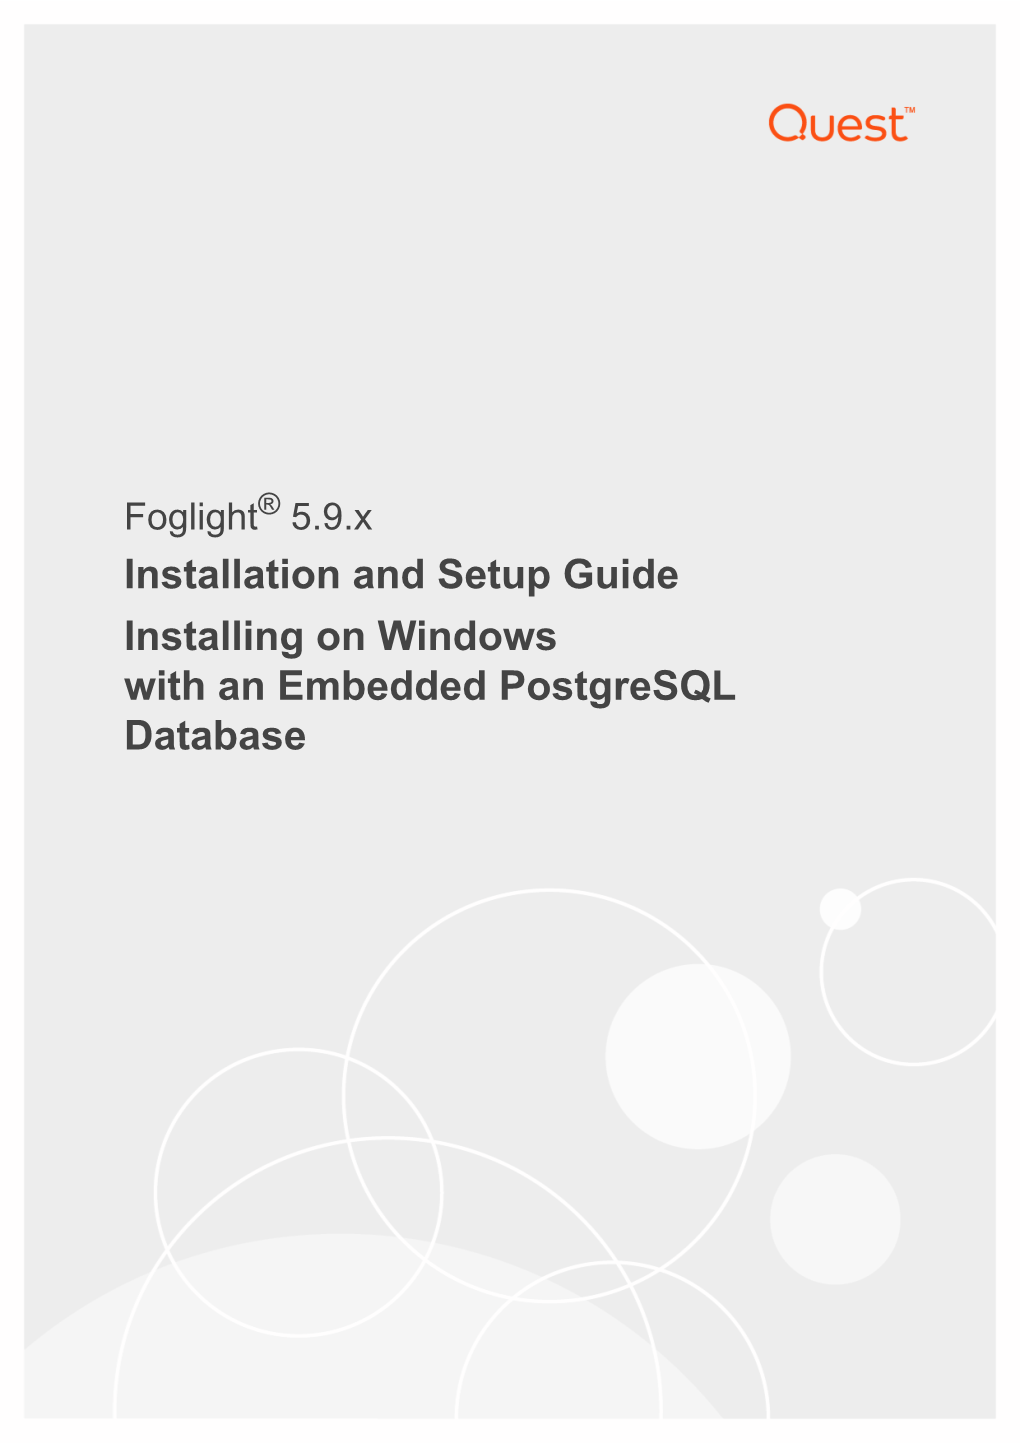 Foglight® 5.9.X Installation and Setup Guide Installing on Windows with an Embedded Postgresql Database © 2018 Quest Software Inc